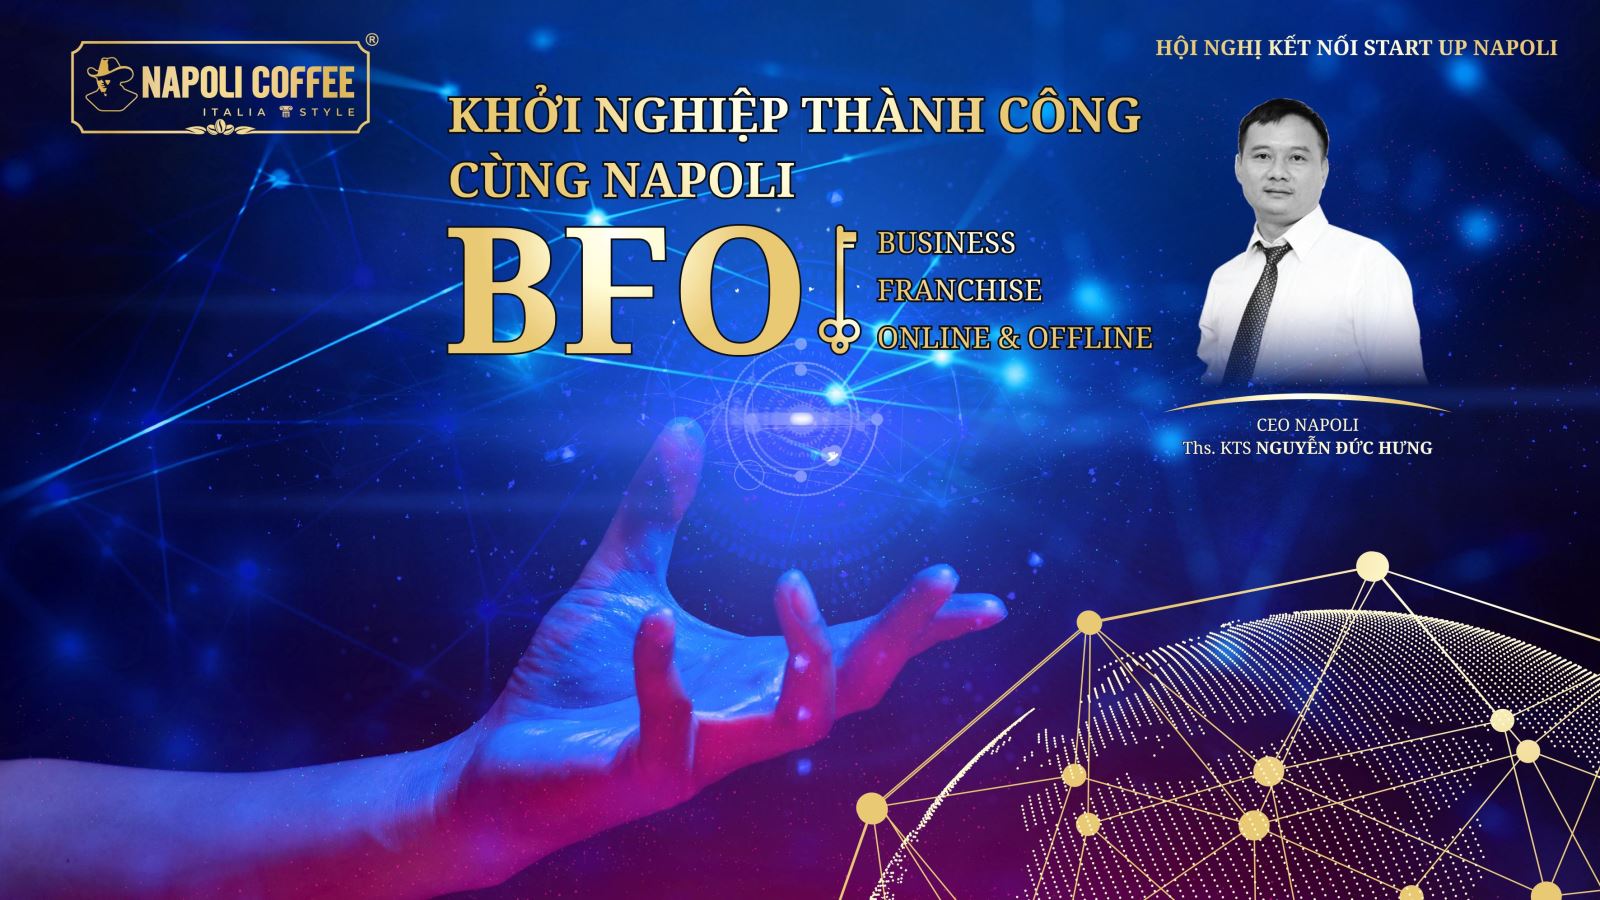 tin-tuc-napoli-khoi-nghiep-thanh-cong-cung-napoli-bfo-(business-franchise-online-offline)